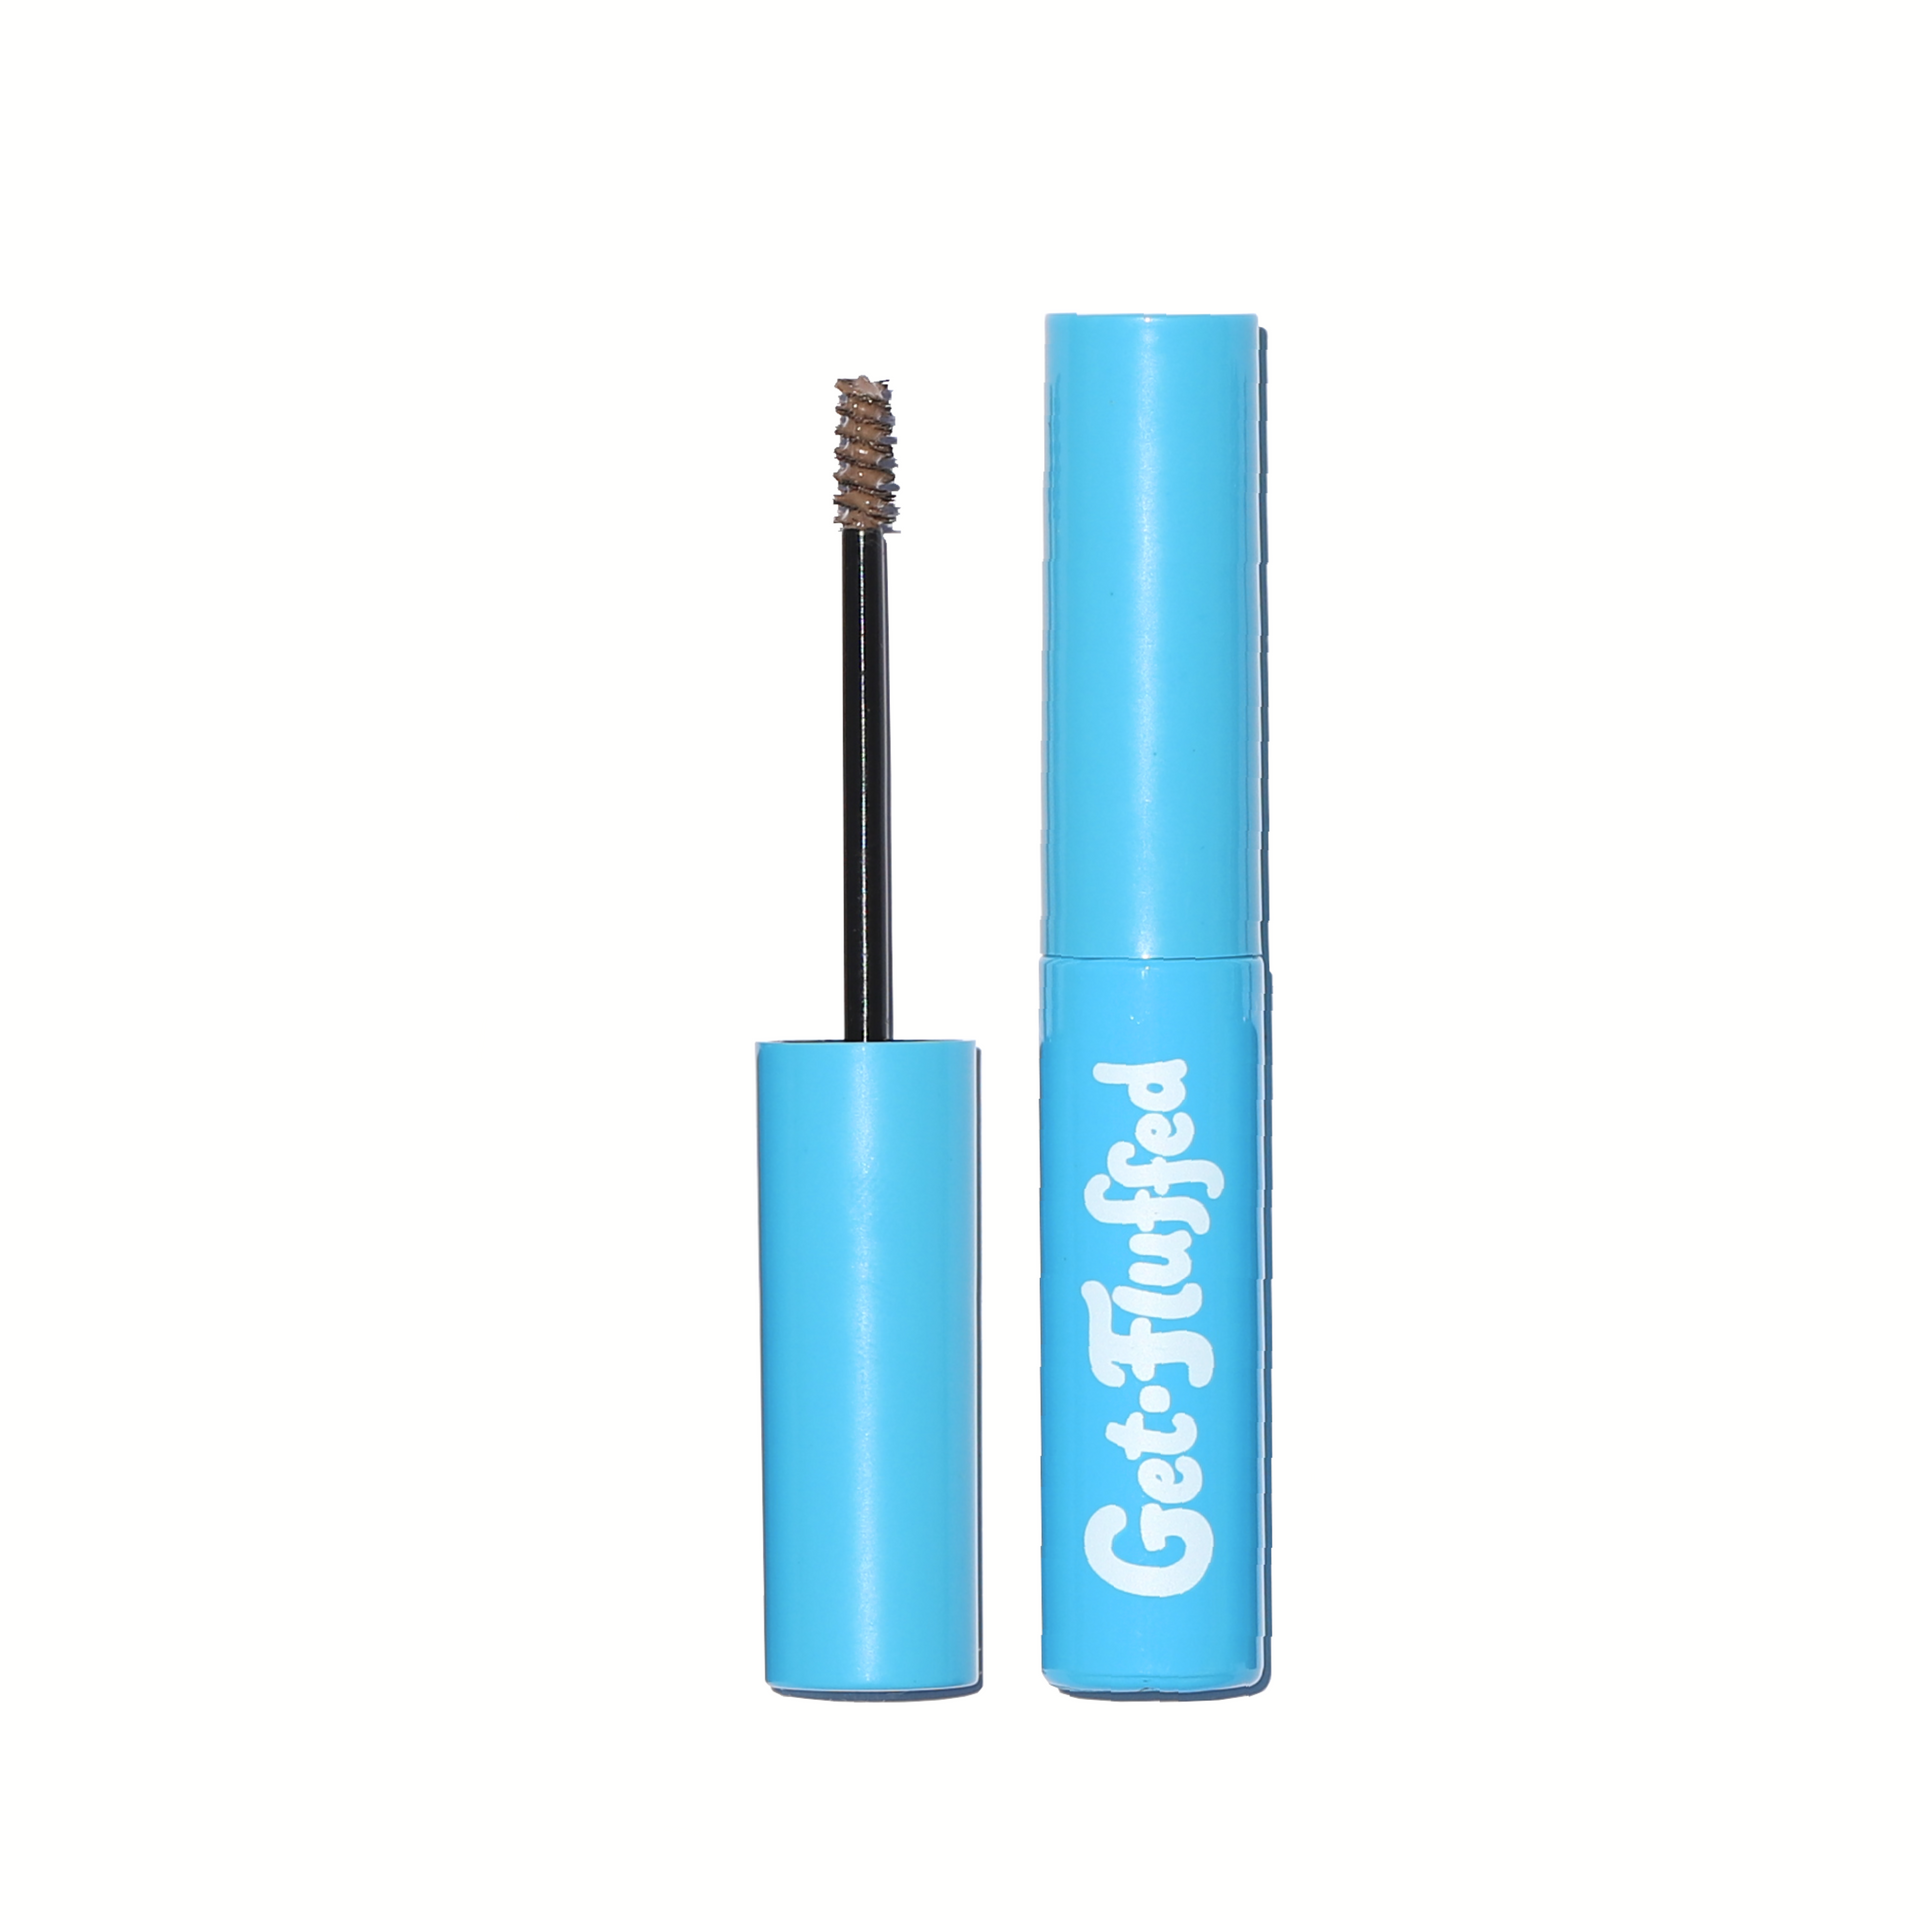 Blue tube of Get-Fluffed Brow Gel with mini spoolie brush for natural-looking eyebrow tinting and grooming.